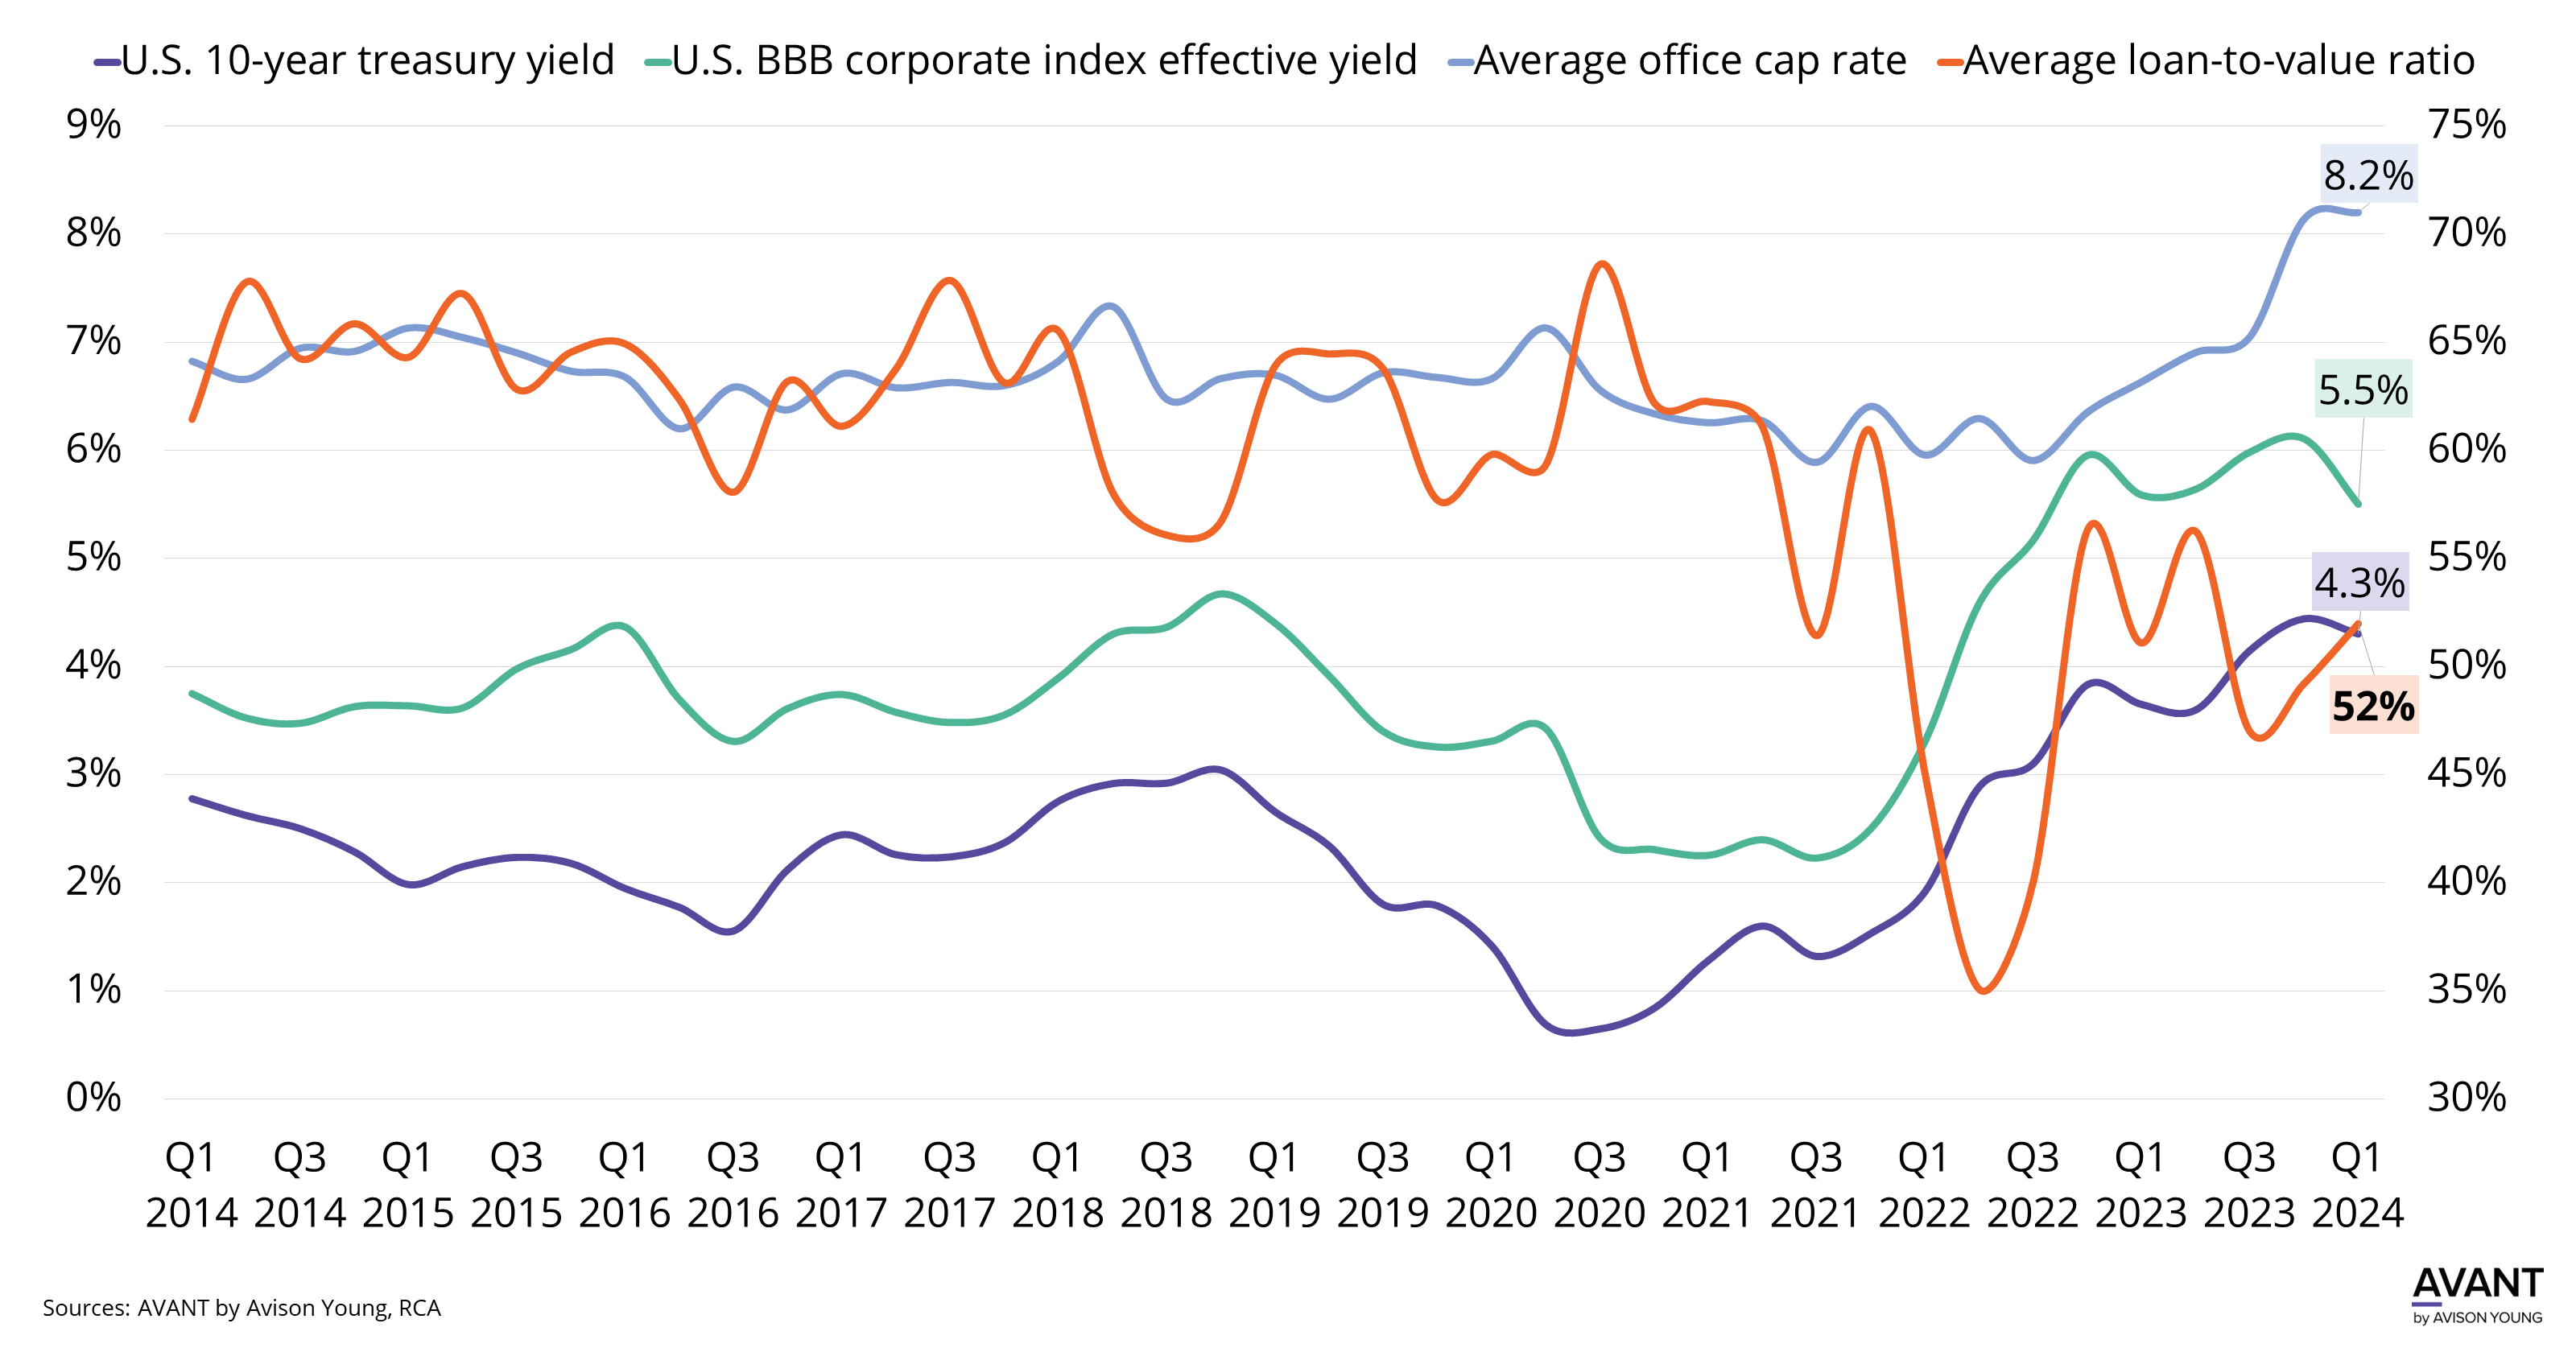 graph of U.S. 10-year treasury yield, BBB corporate index effective yield, average office cap rate and average loan-to-value ratio in the U.S. from Q1 2014 to Q1 2024